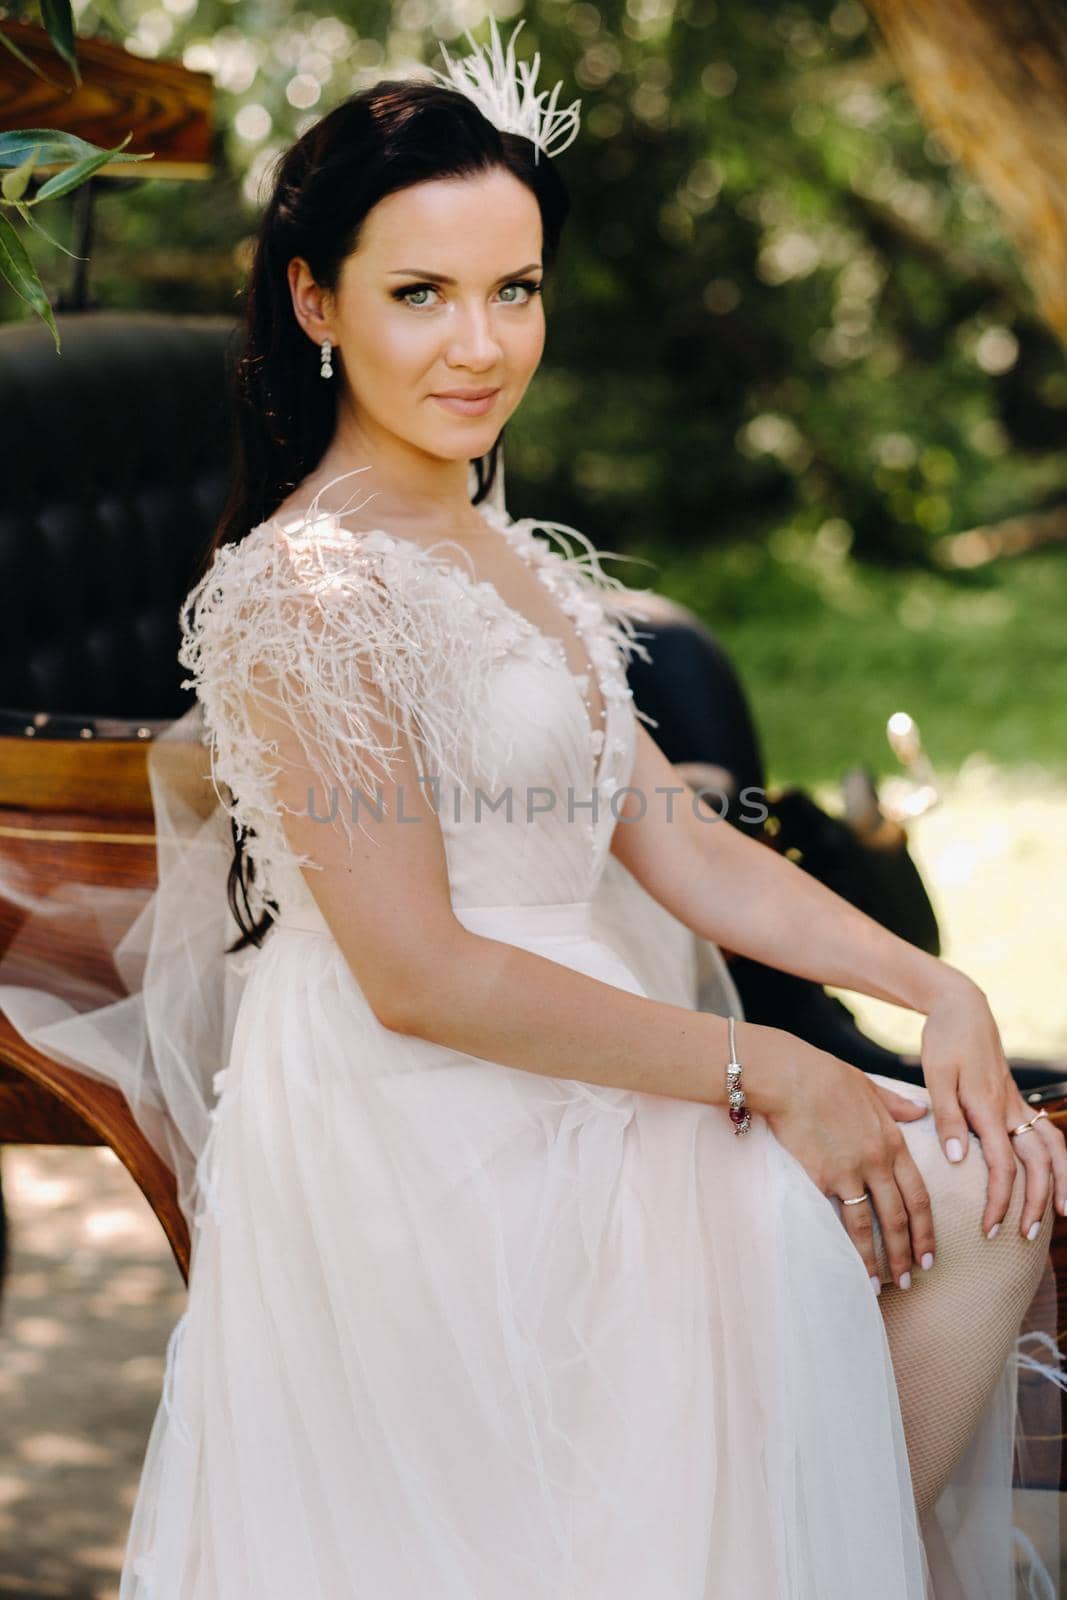 Stylish bride stands near the carriage in nature in retro style.